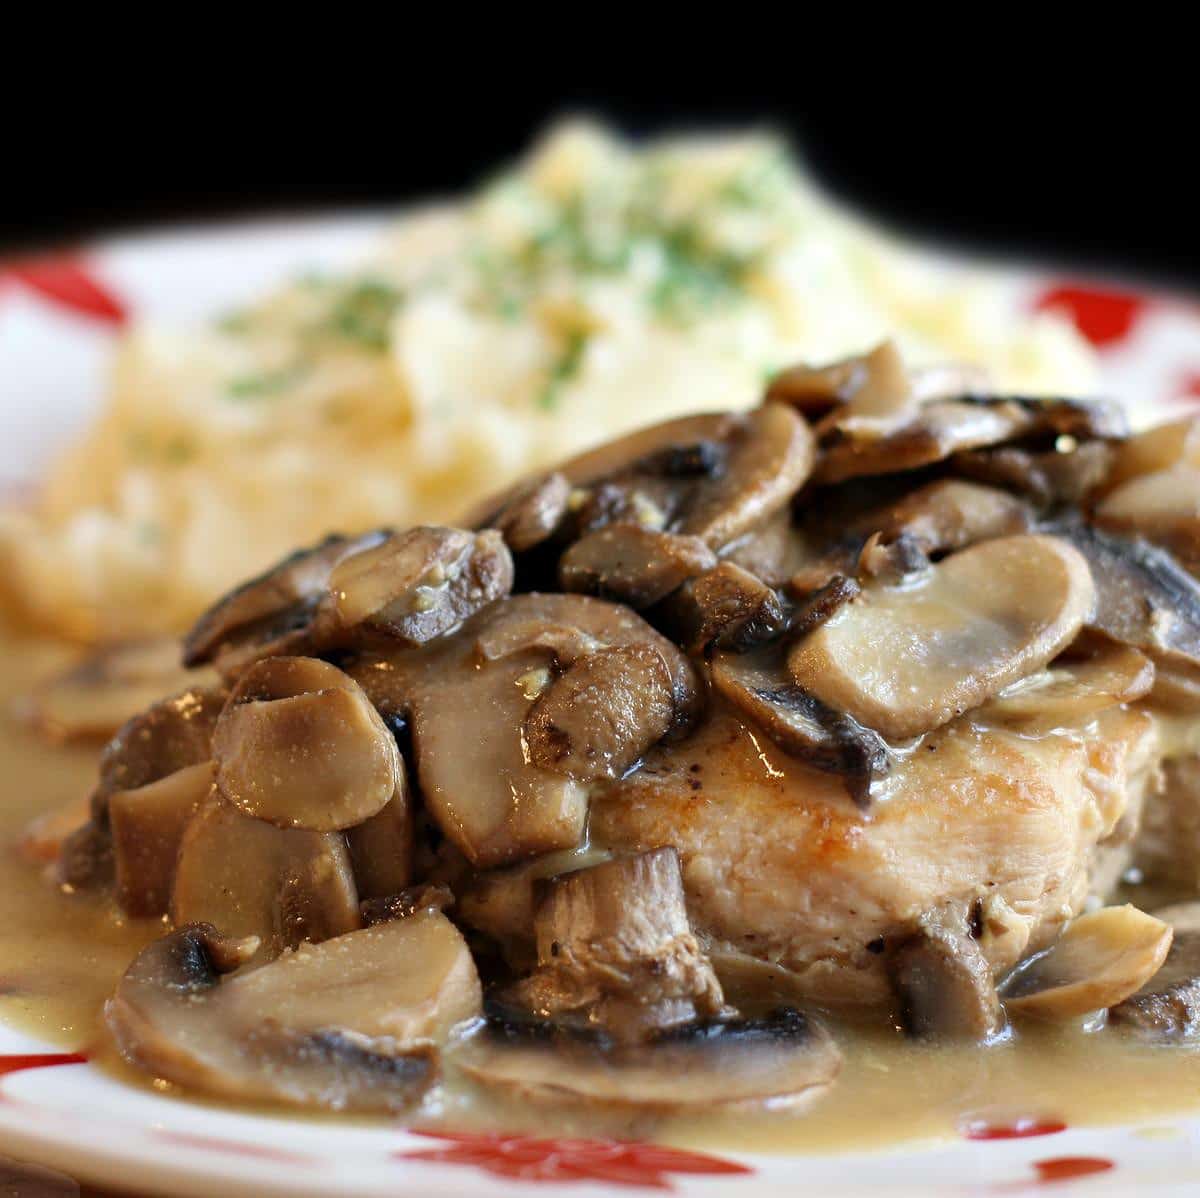  Get ready to experience a mouth-watering combination of juicy chicken, savory mushrooms, and sweet honey mustard sauce.